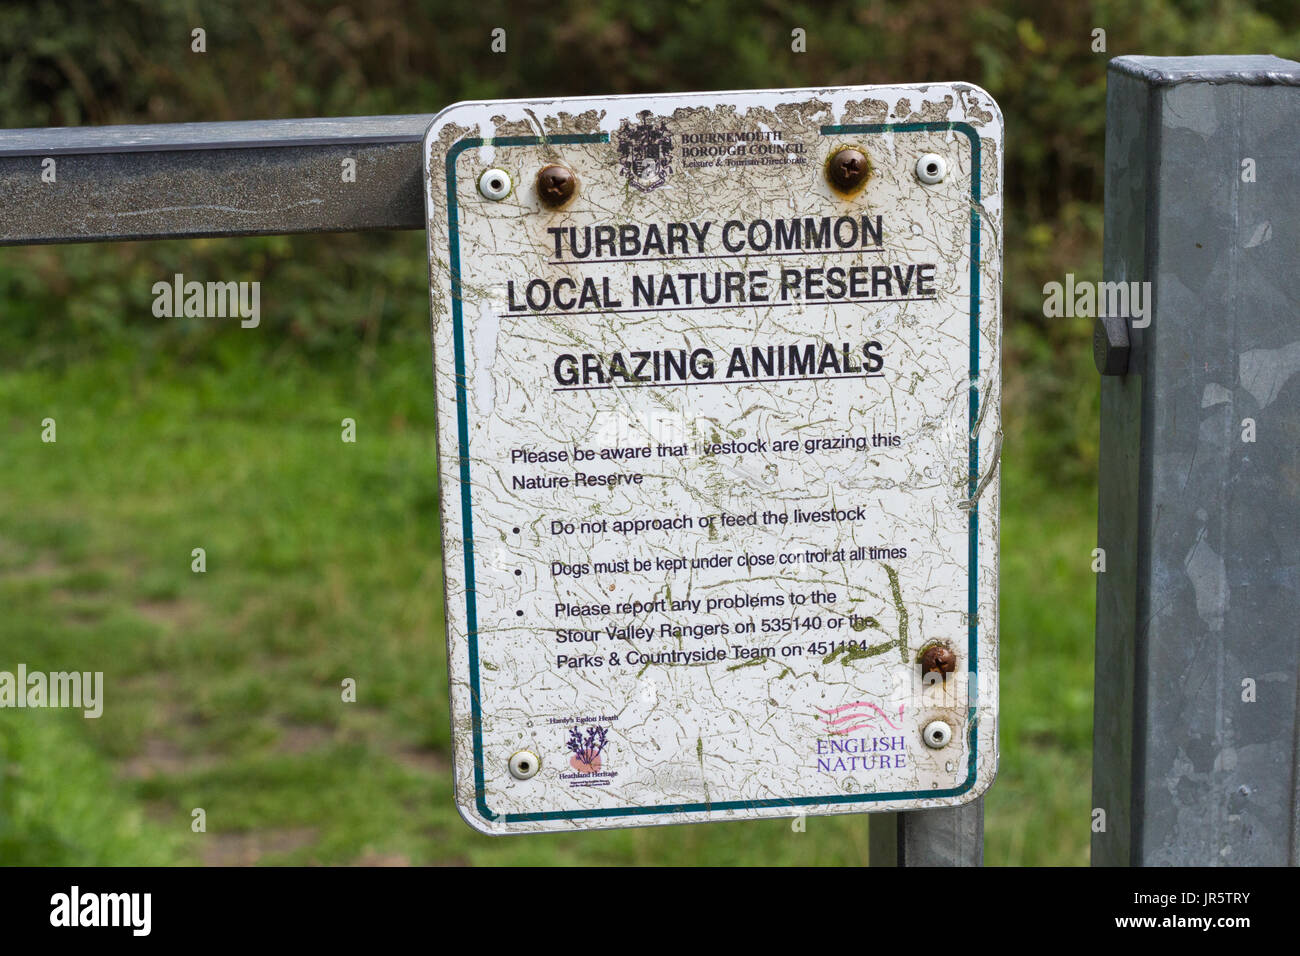 Turbary Common Local Nature Reserve, grazing animals notice on gate entrance Stock Photo